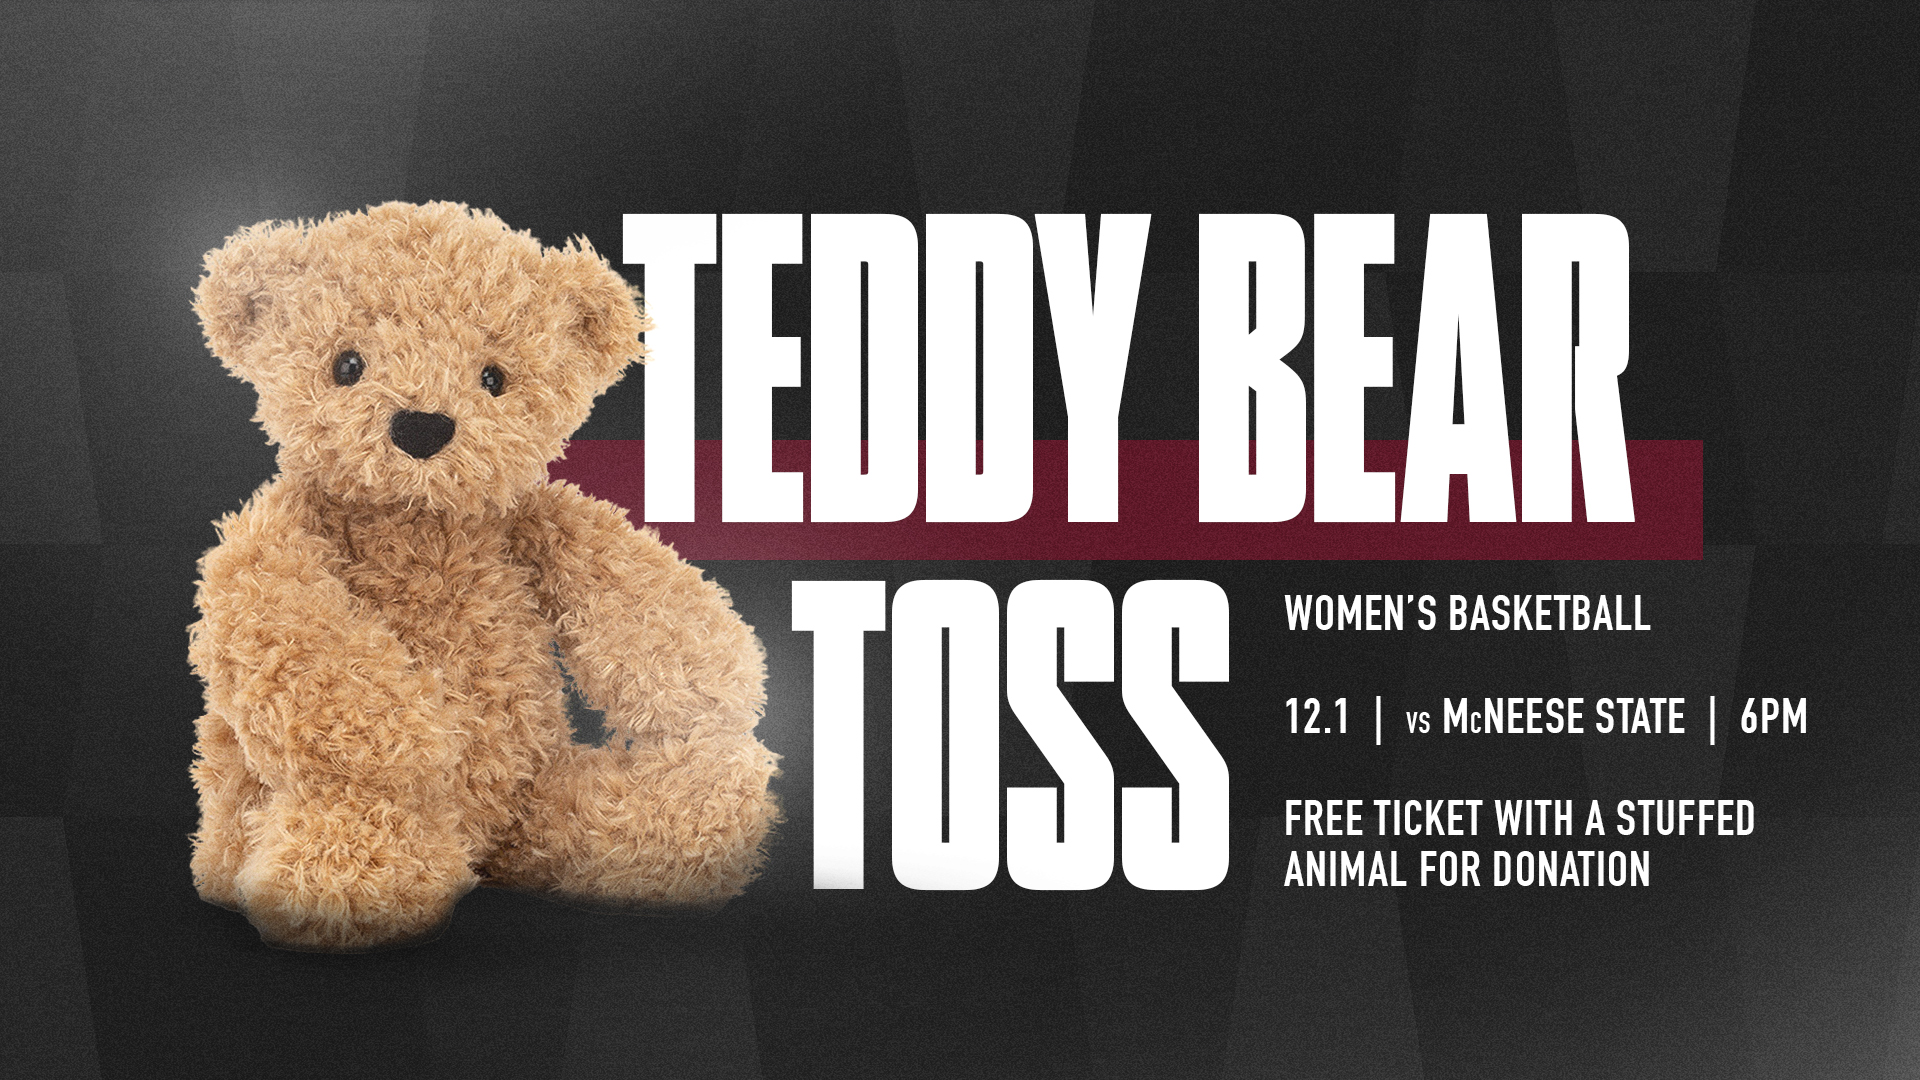 Maroon, white and black graphic with image of a teddy for the Teddy Bear Toss promotion at MSU's women's basketball game